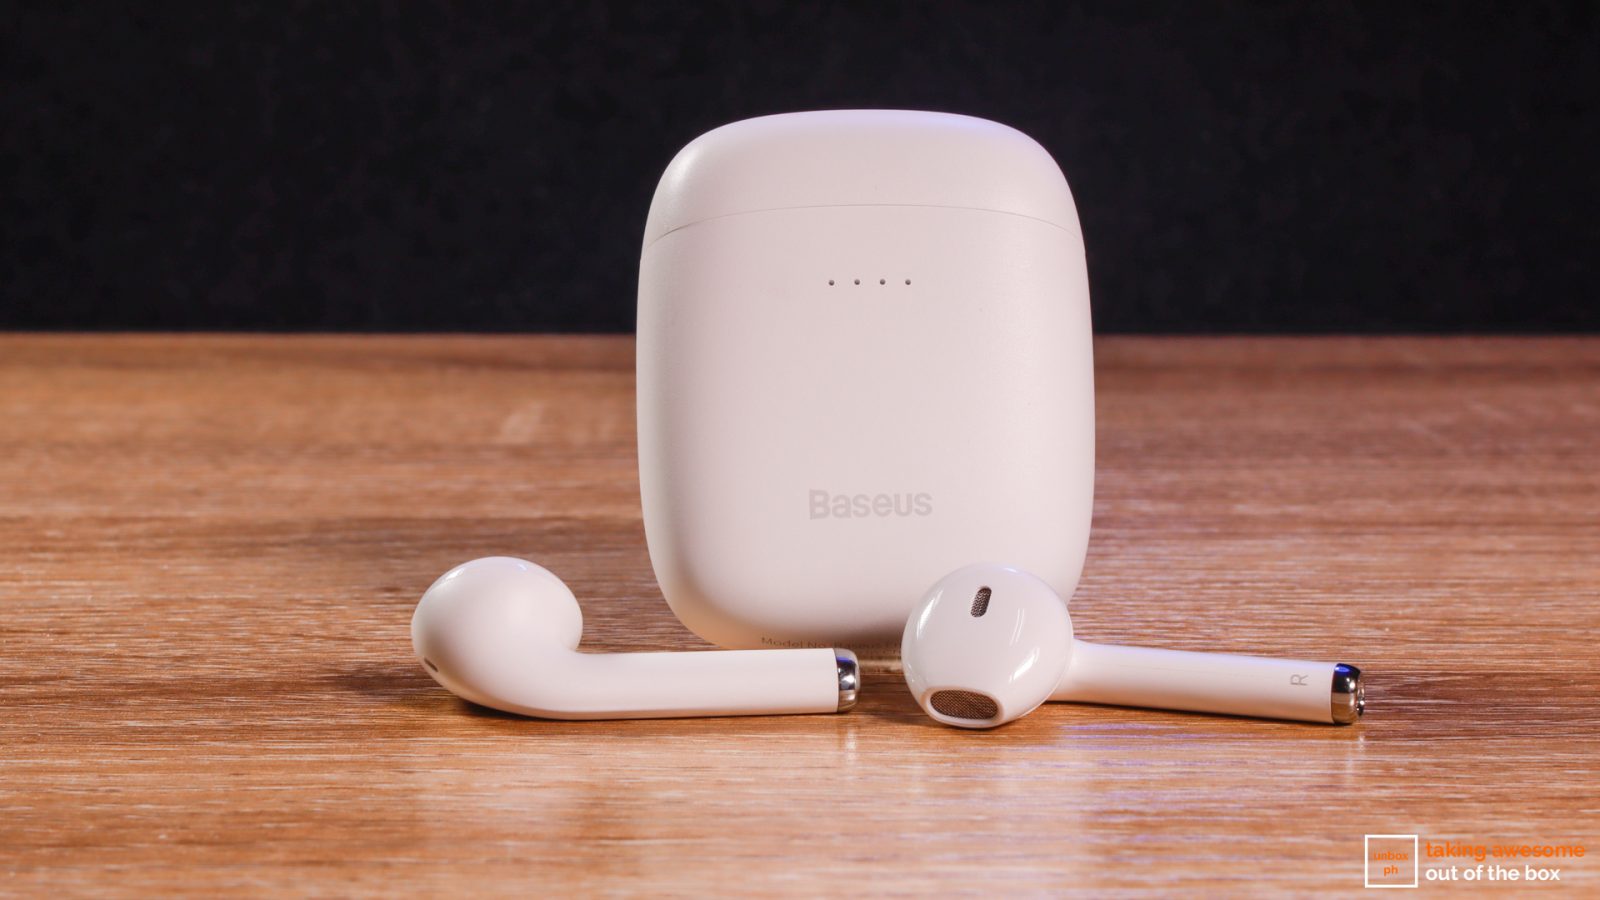 The case and earpods of Baseus Encok W04 Pro